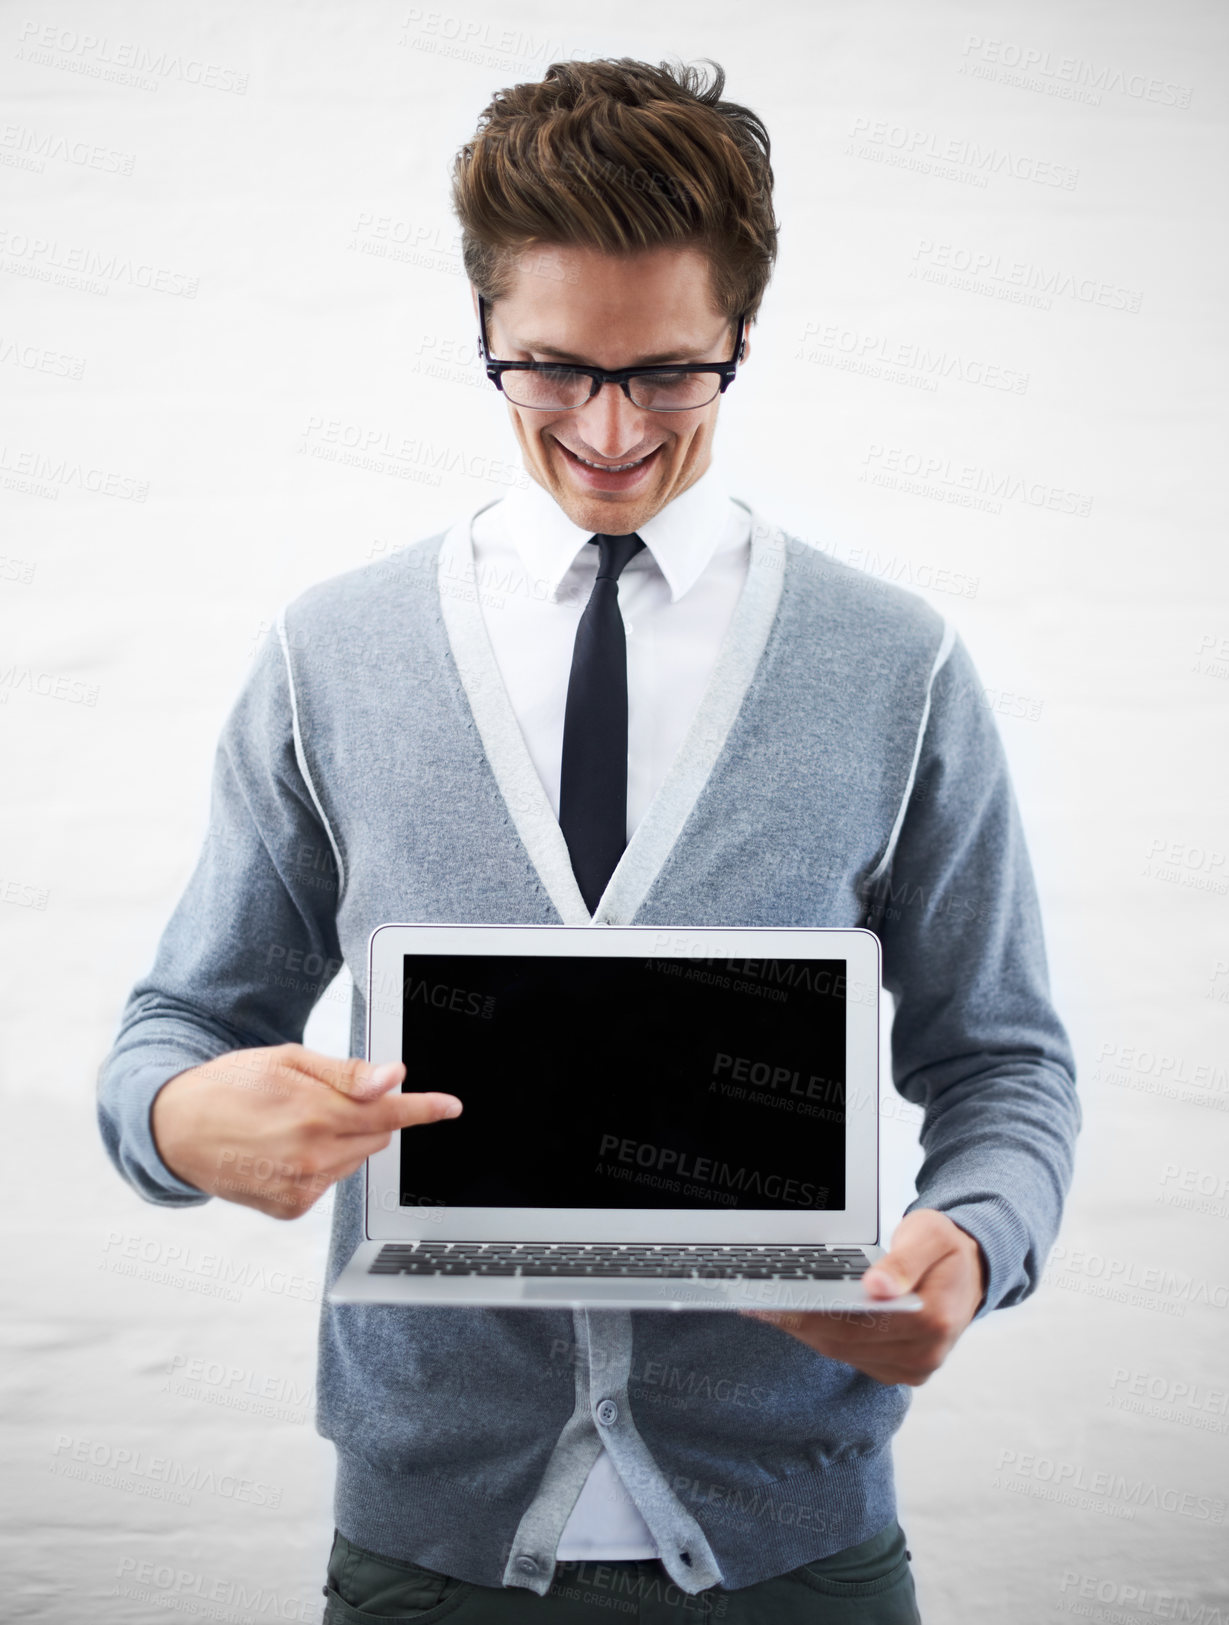 Buy stock photo A young nerdy guy pointing at copyspace on his laptop screen